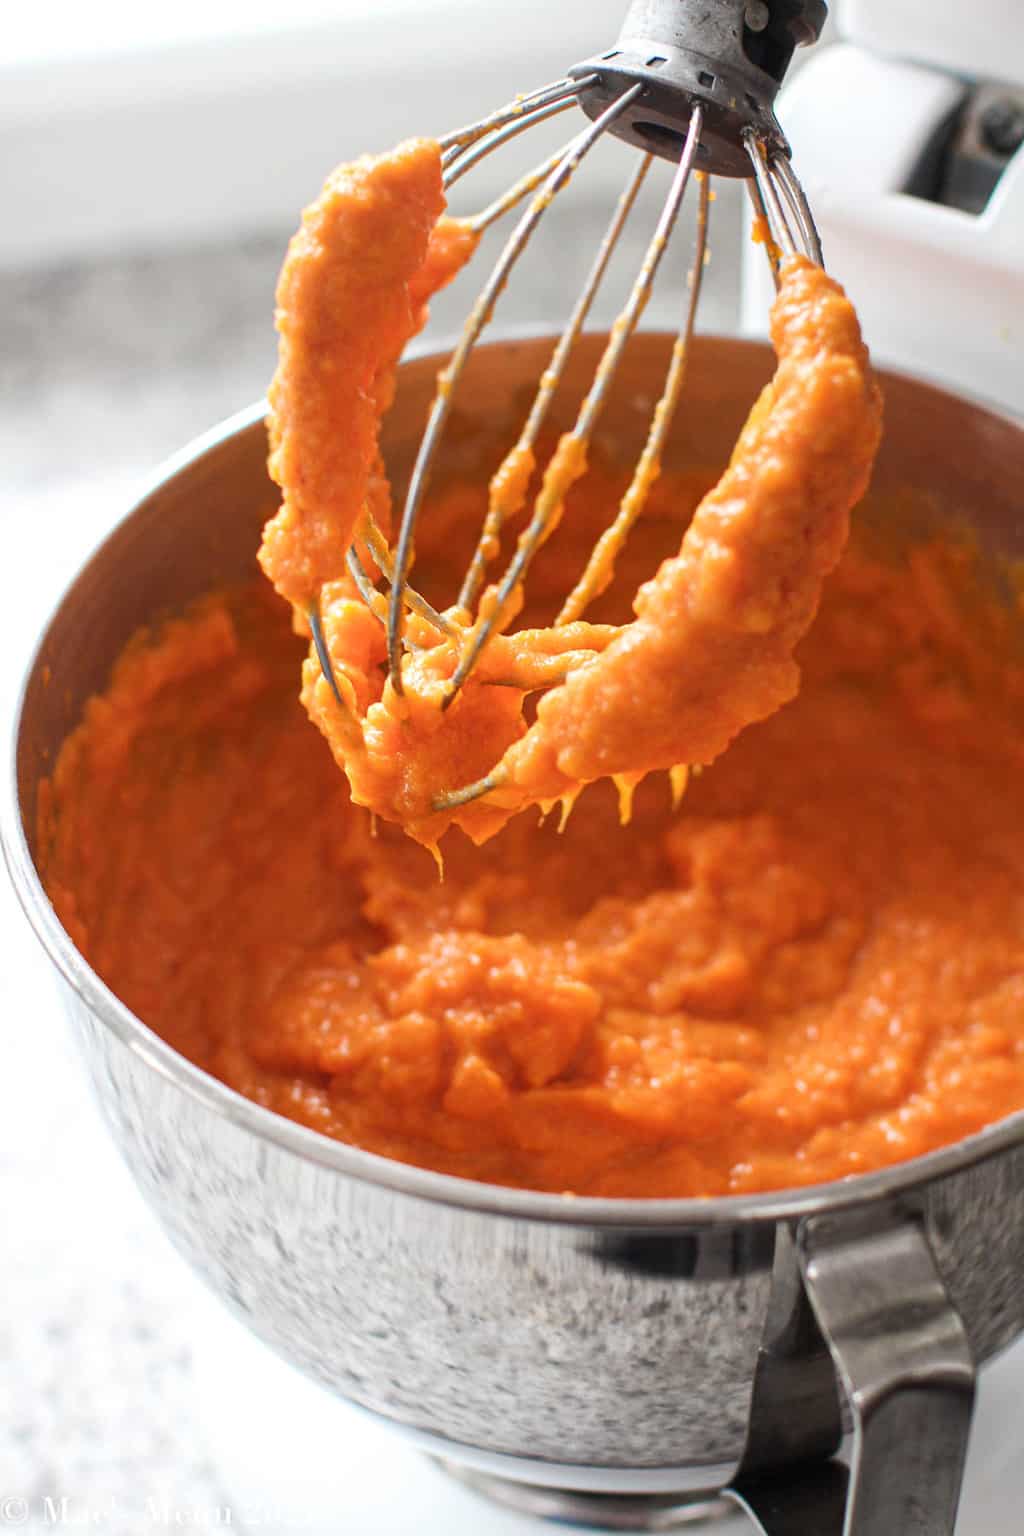 The sweet potato souffle in the stand mixer with the orange batter on the whisk